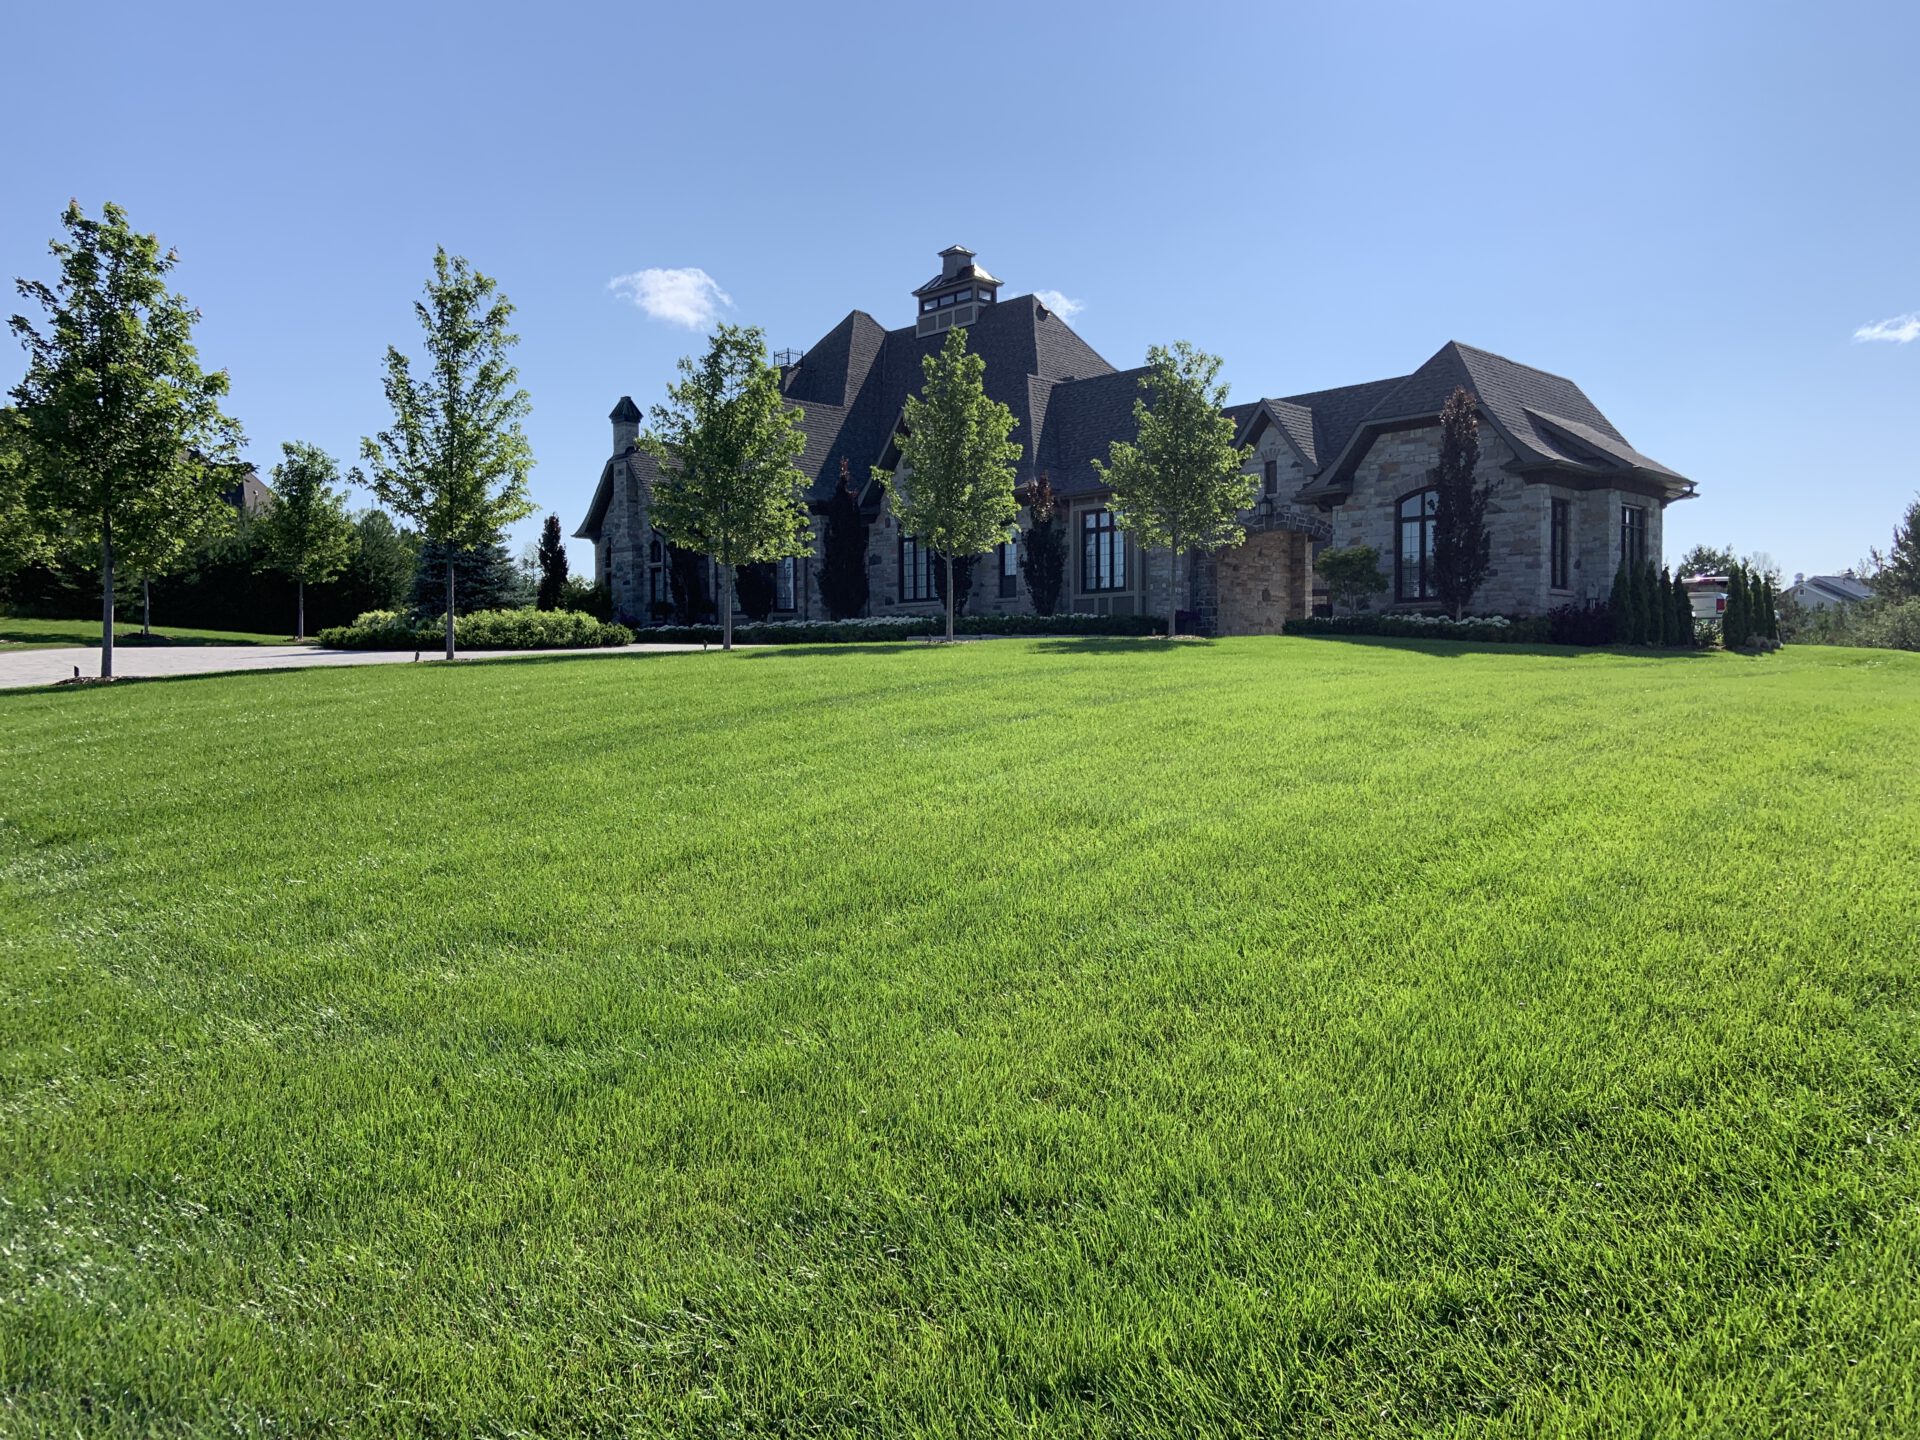 A large, elegant stone house with a prominent roof and multiple chimneys sits behind a lush green lawn under a clear blue sky.